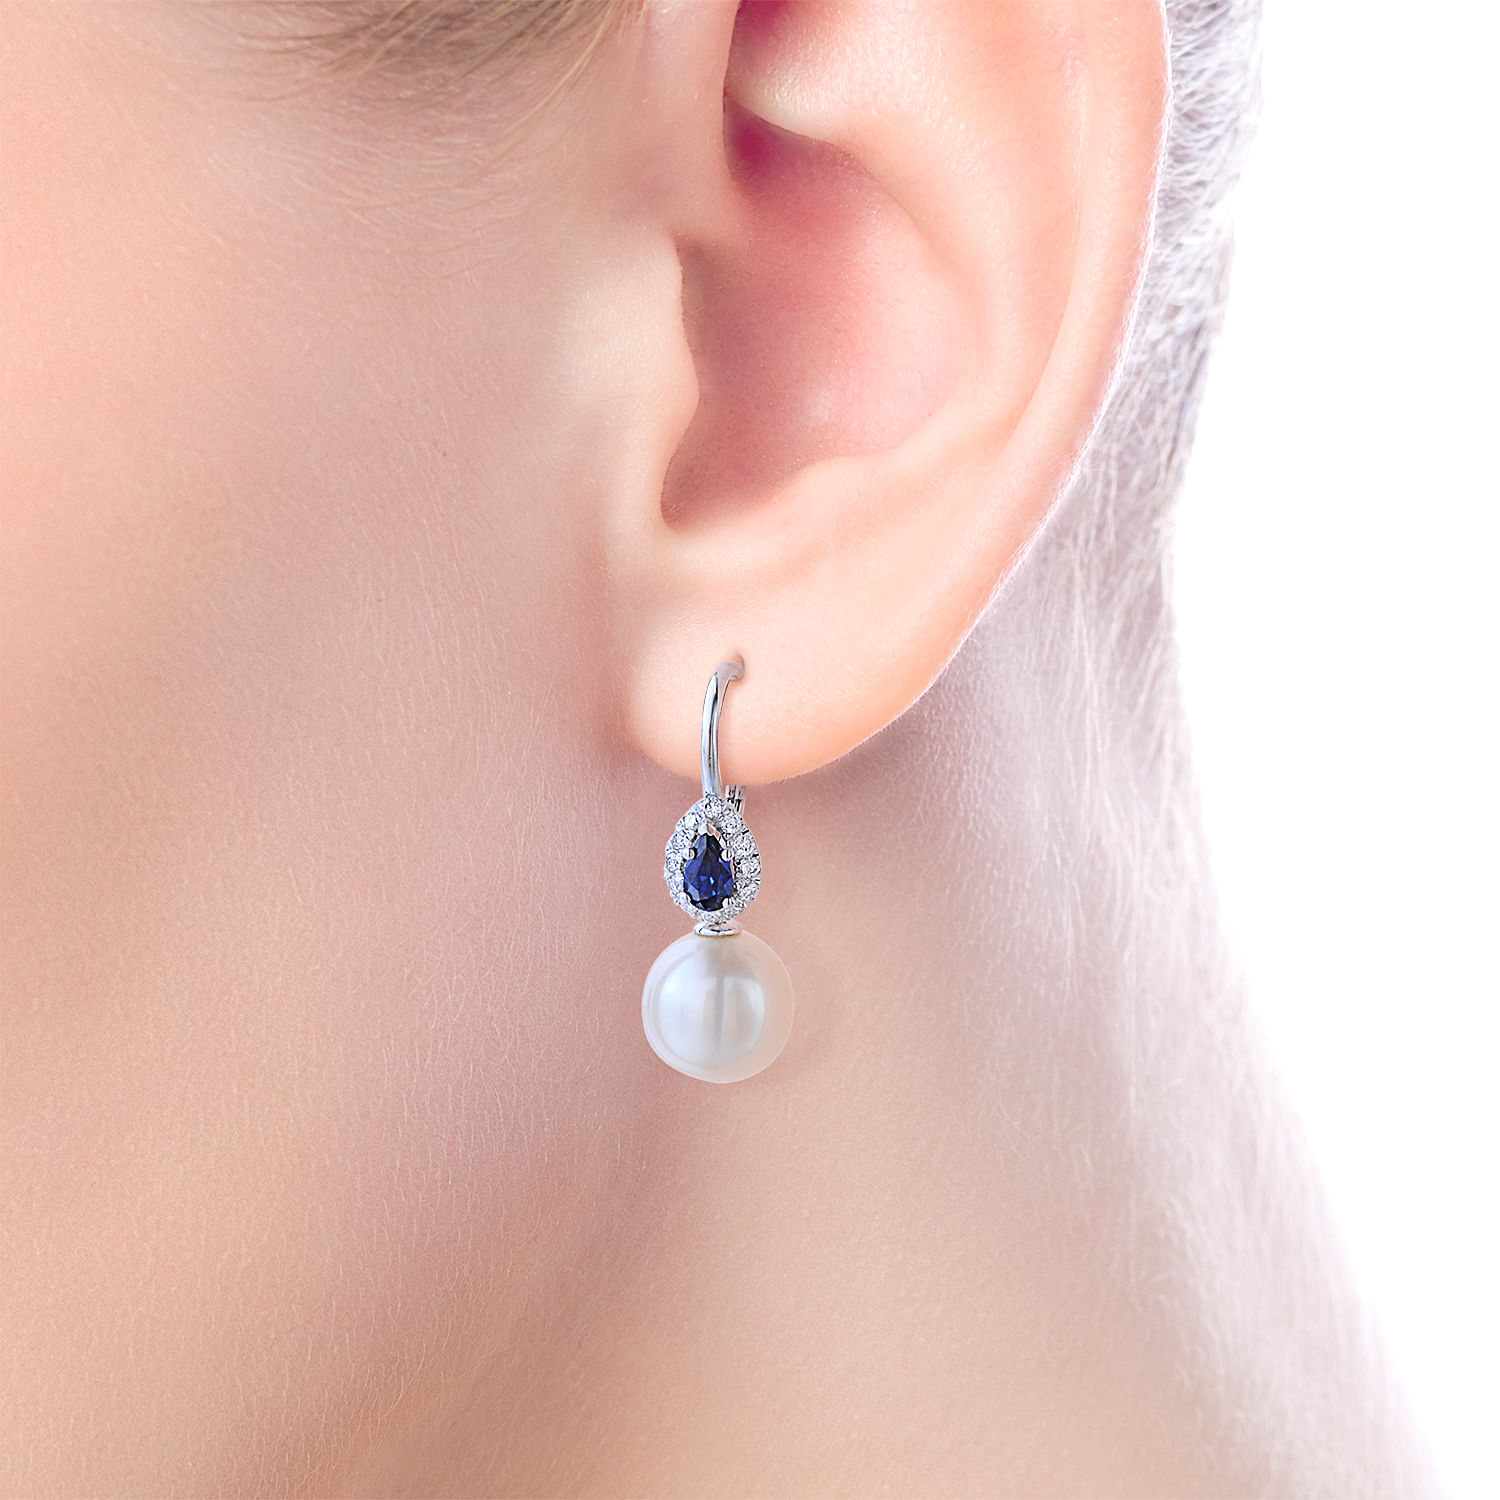 14K White Gold Pear Sapphire and Diamond Halo Earrings with Pearl Drops